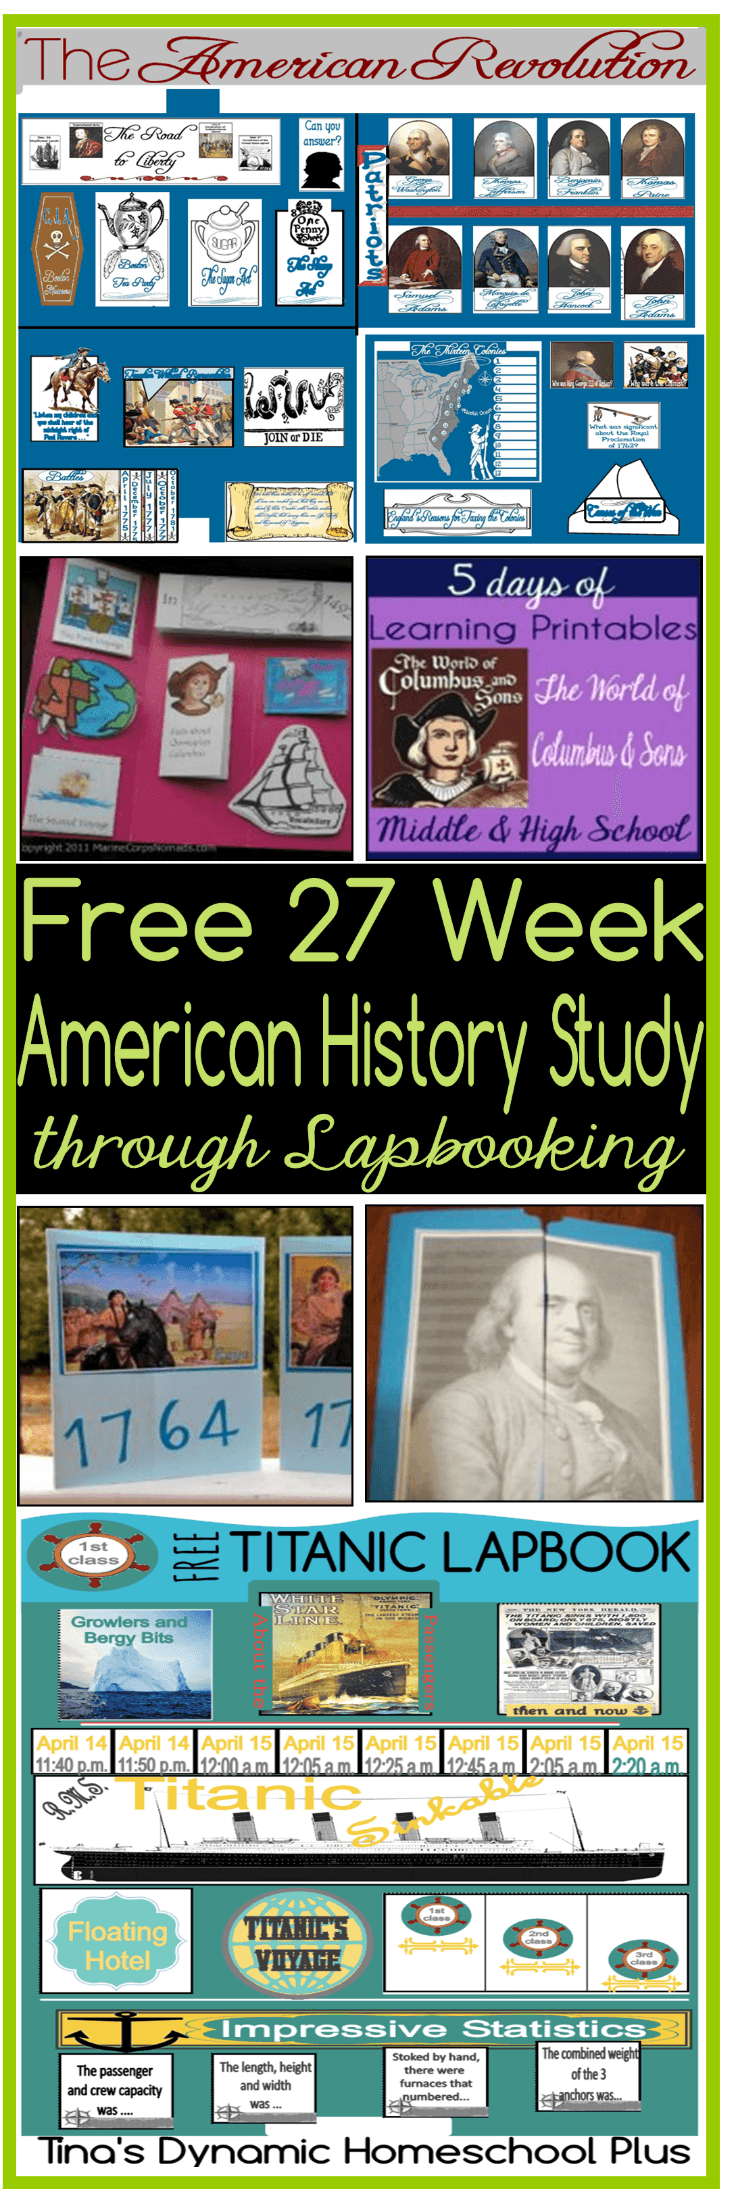 Free 27 Week American History Study through Lapbooking In Chronological Order @ Tina's Dynamic Homeschool Plus